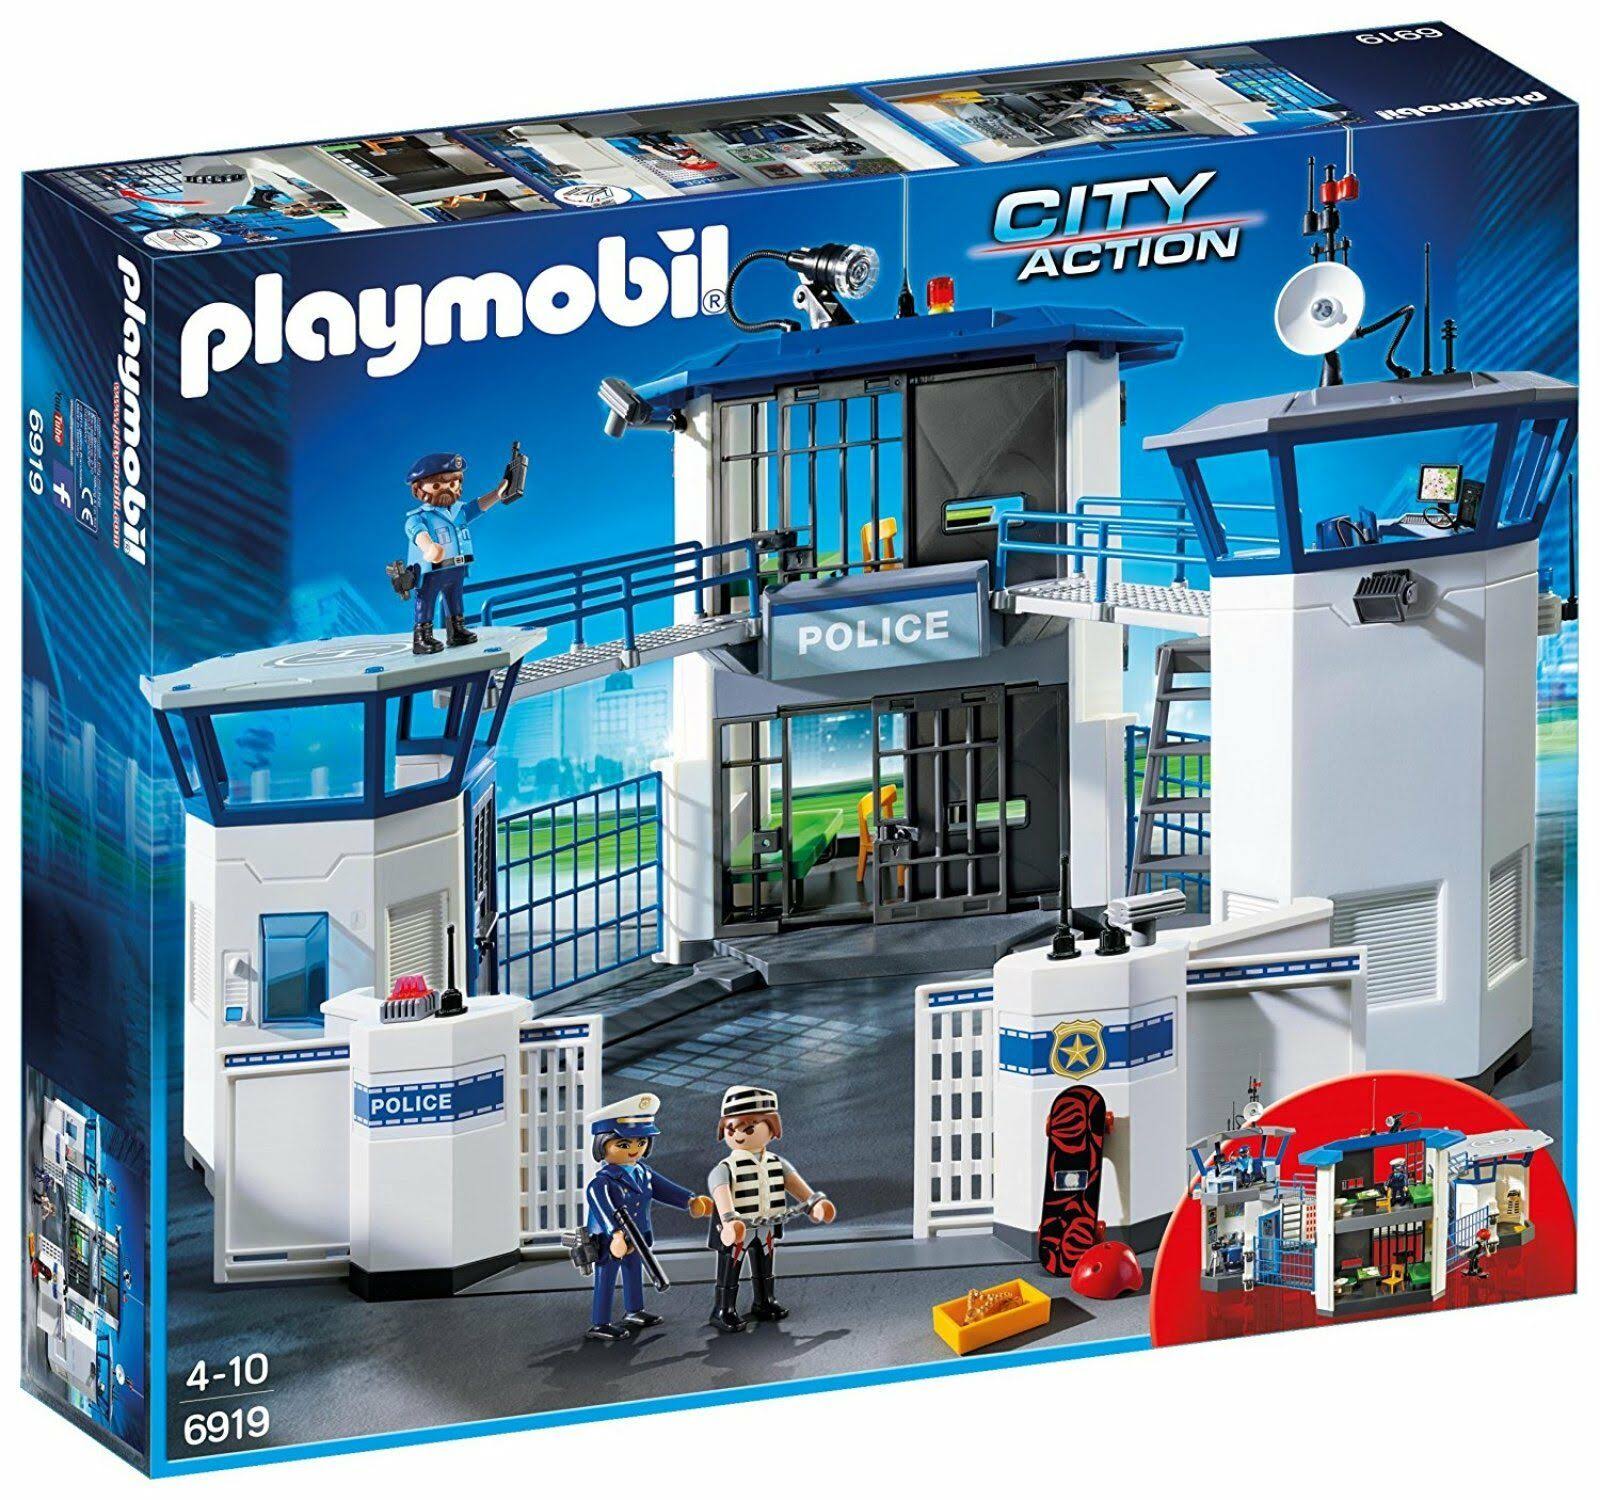 Playmobil City Action Police Station Play Set - 23" x 19.7"